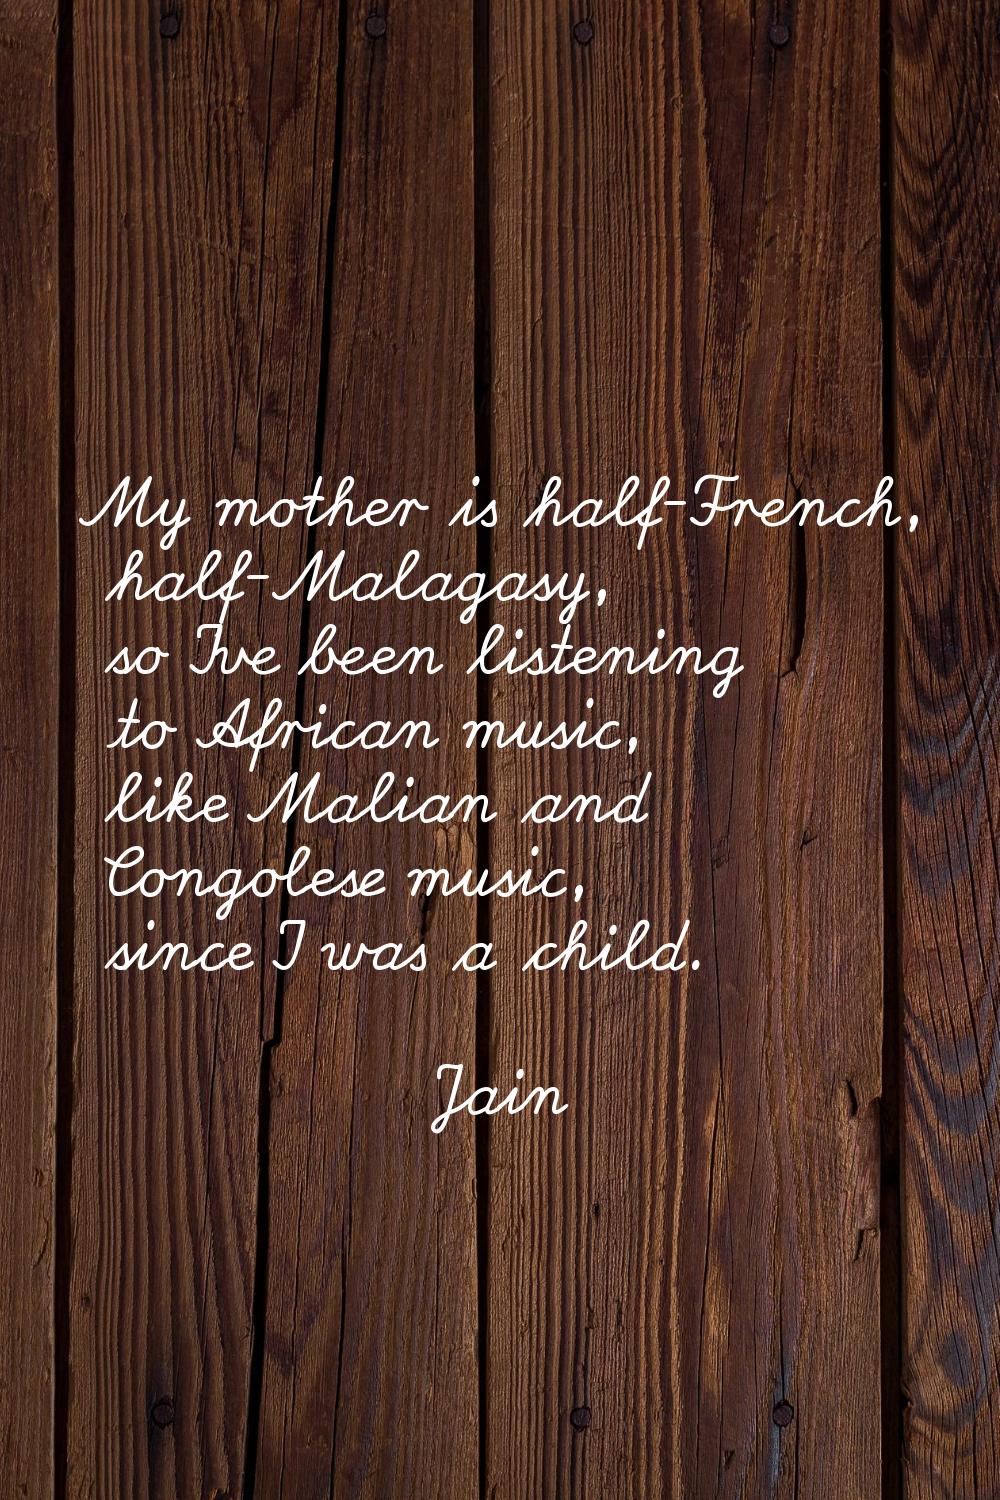 My mother is half-French, half-Malagasy, so I've been listening to African music, like Malian and C